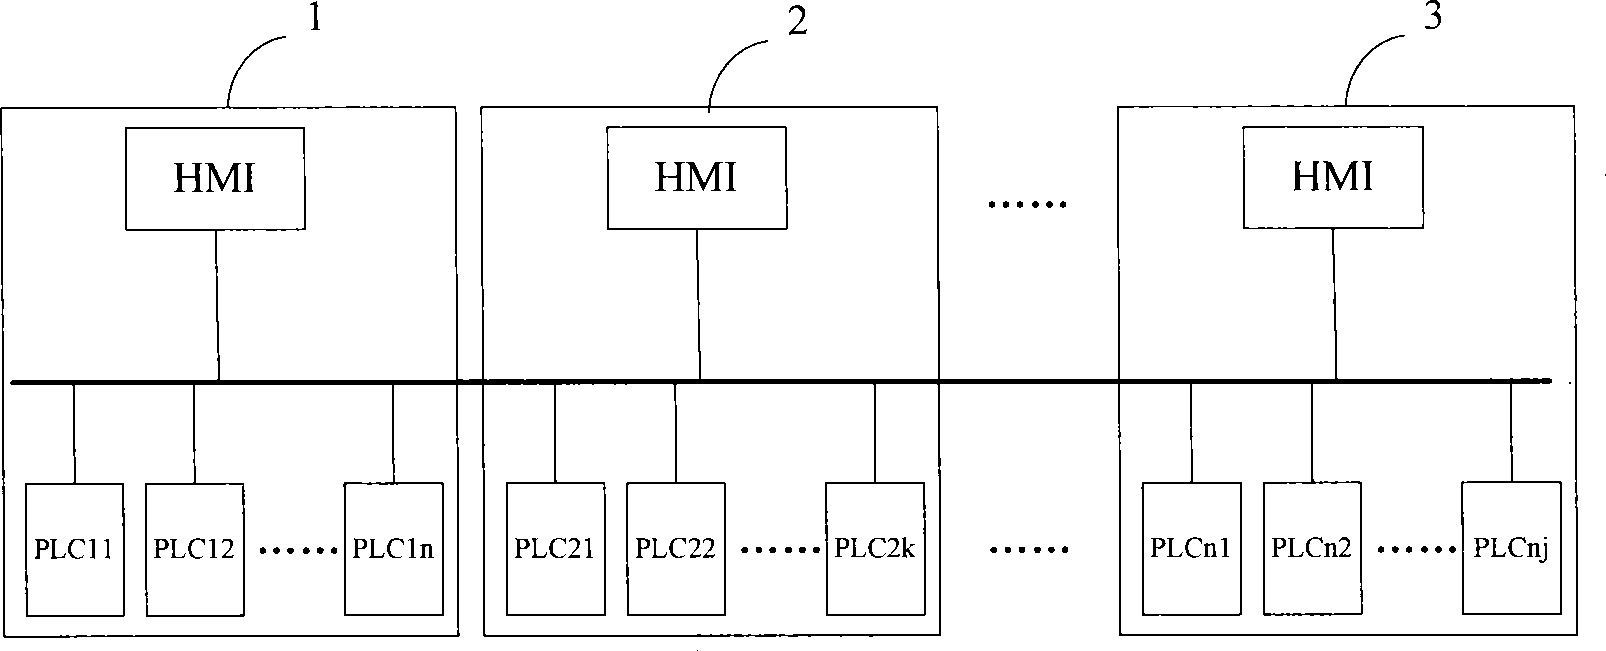 Method for implementing data transmission between PLC of different brands